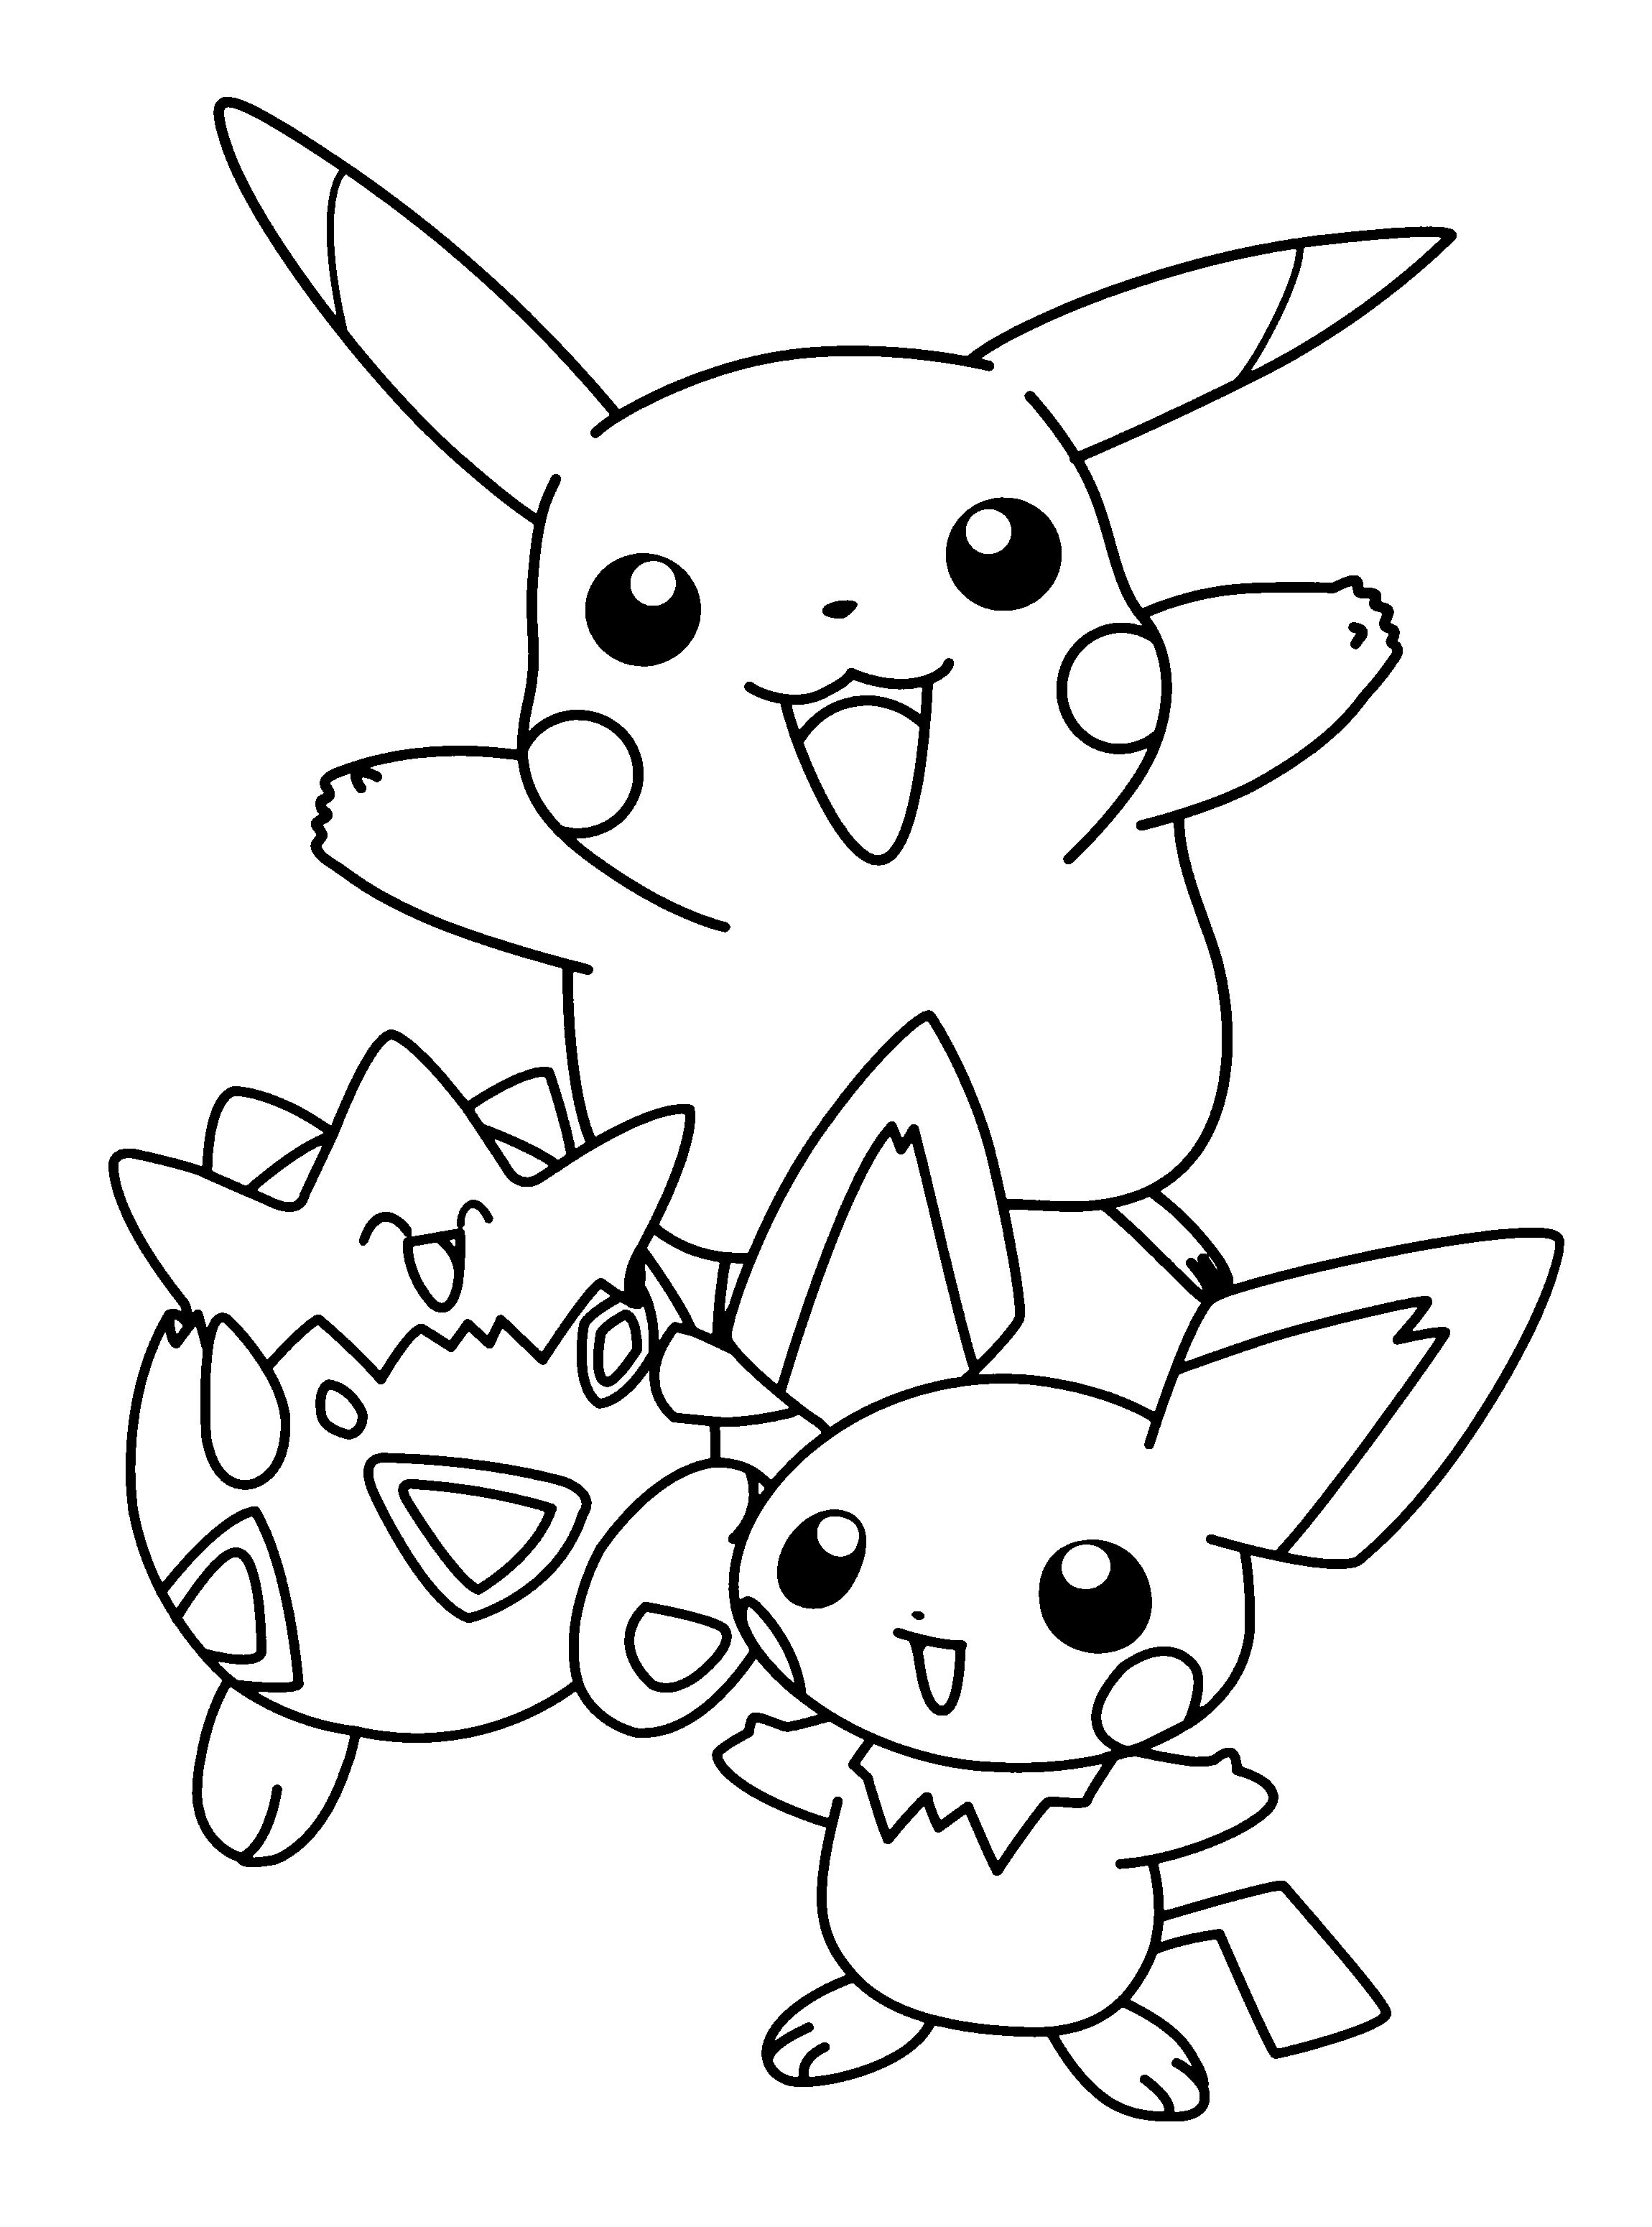 pokemon-coloring-pages-mew-of-pokemon-coloring-pages-mew Pokemon Coloring Pages Mew Cartoon 